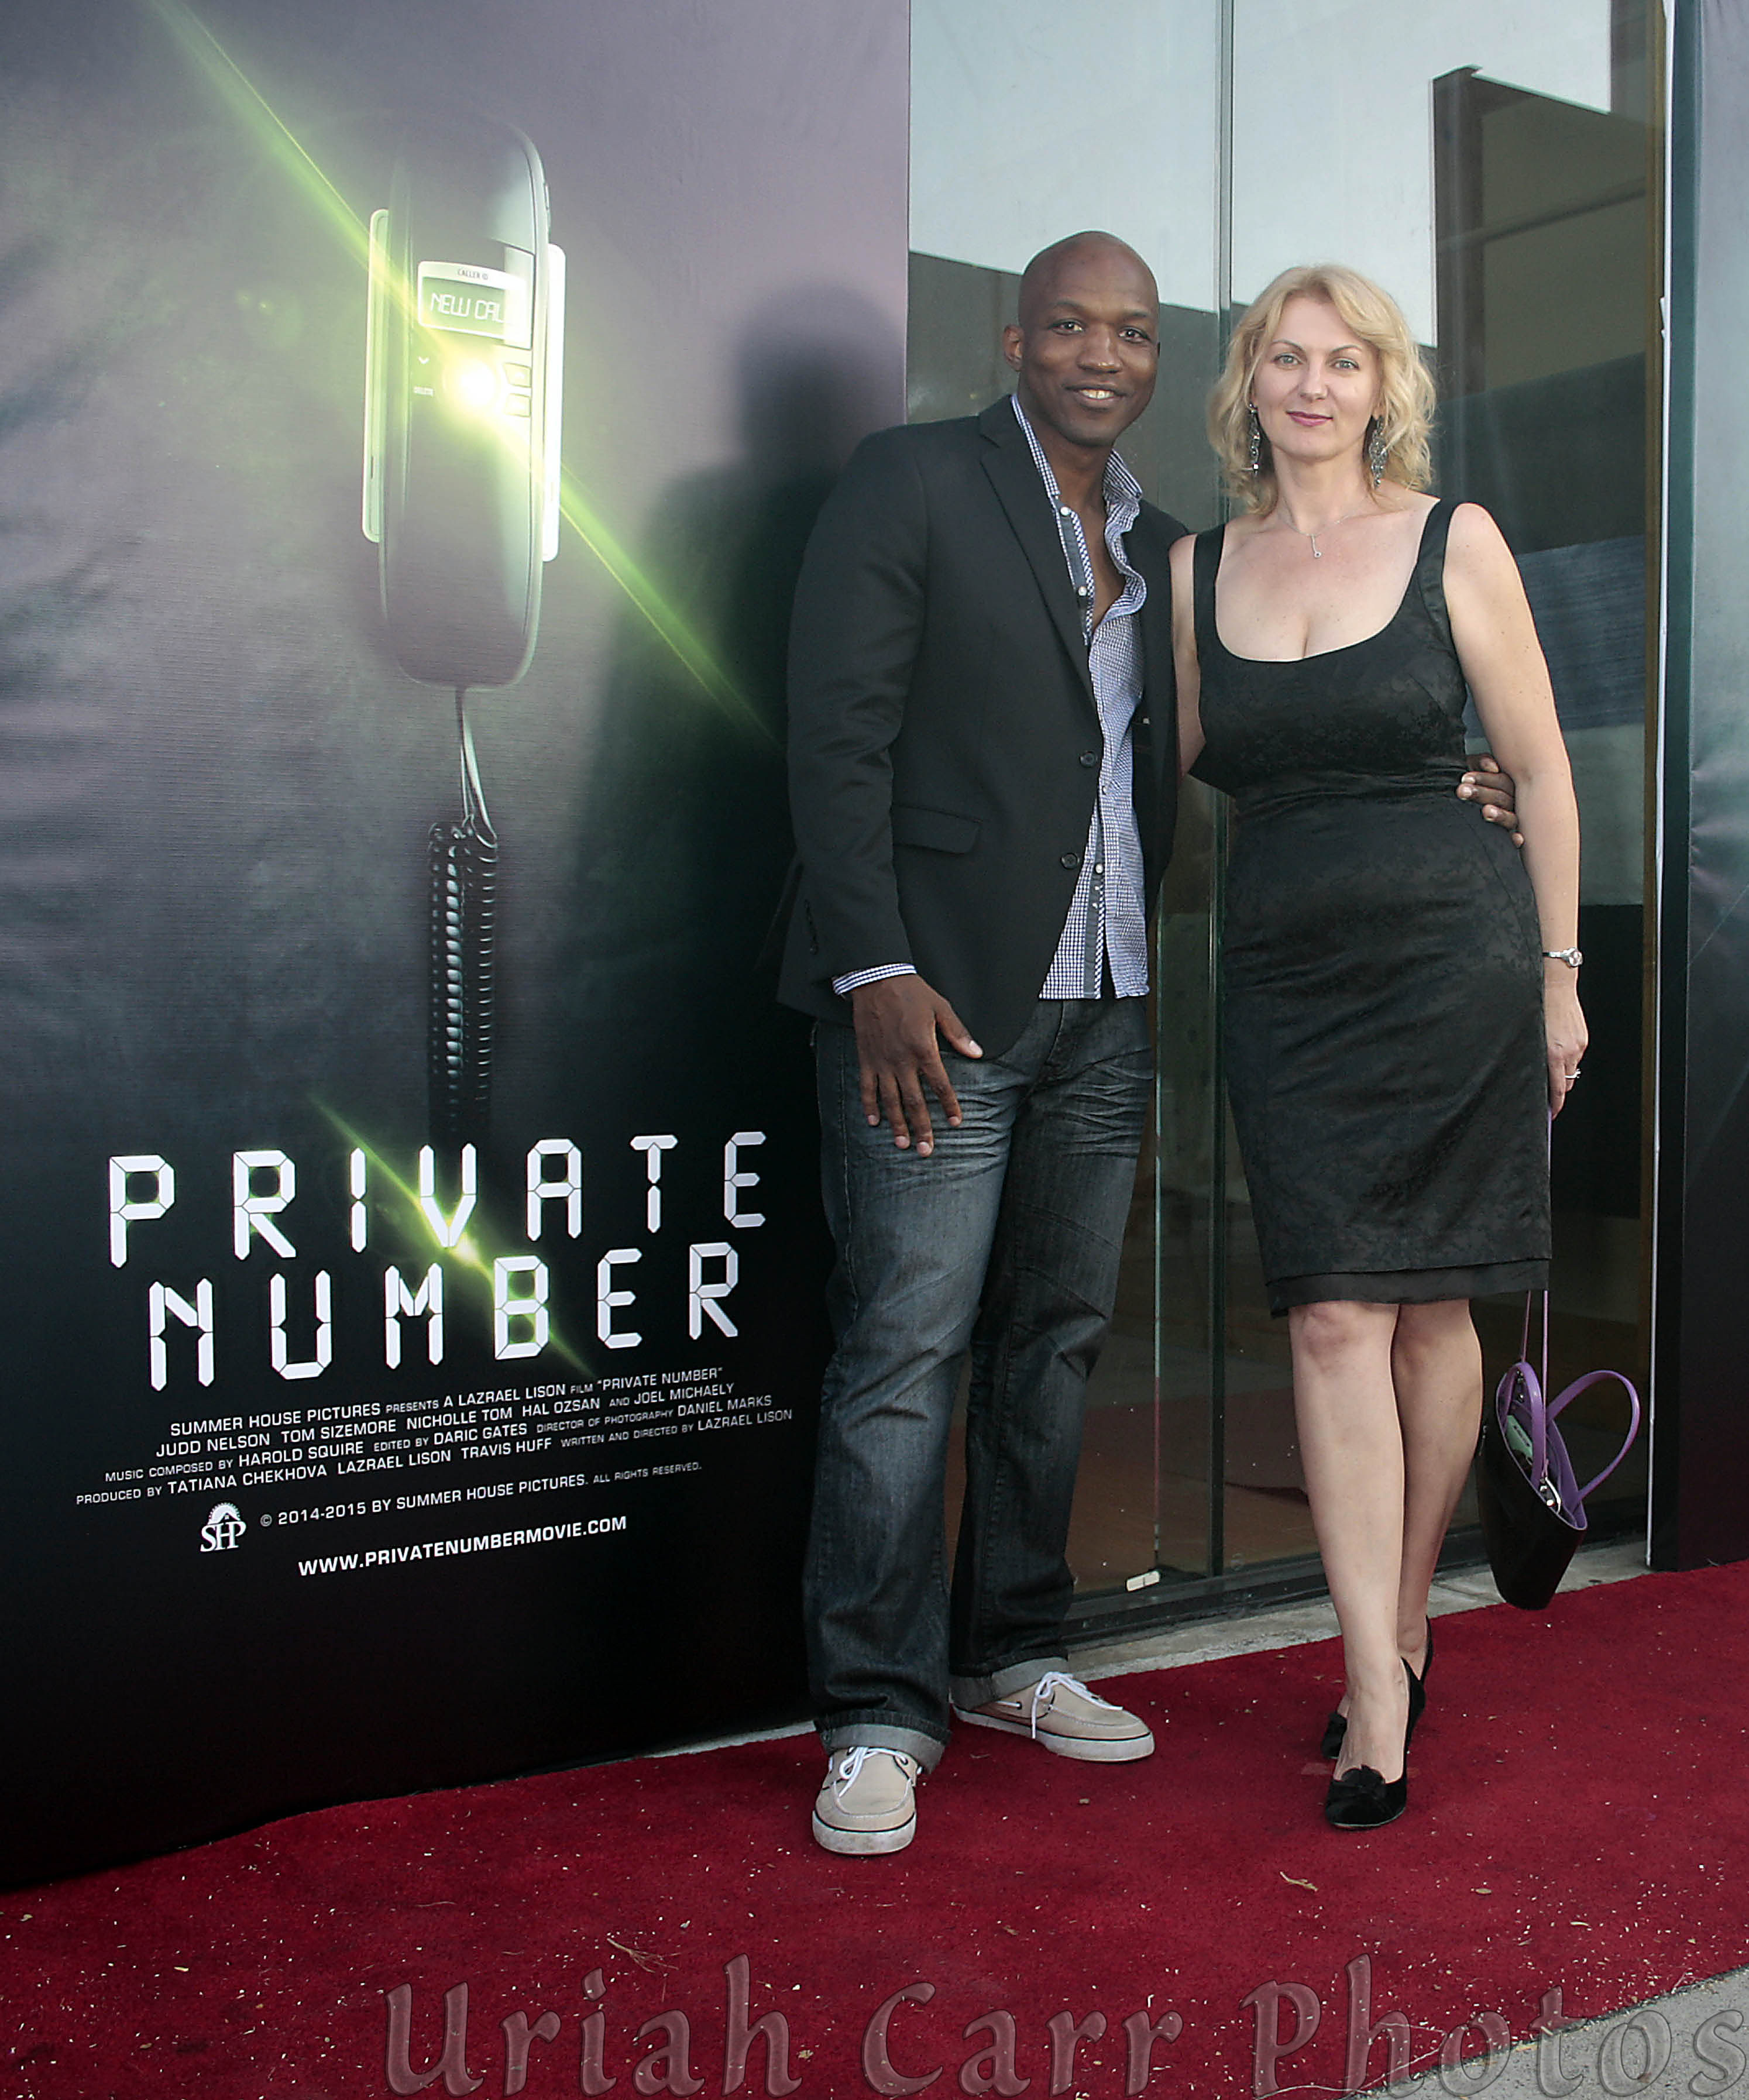 Producer Tatiana Chekhova and Dir. LazRael Lison at the Premiere Screening of PRIVATE NUMBER in Beverly Hills